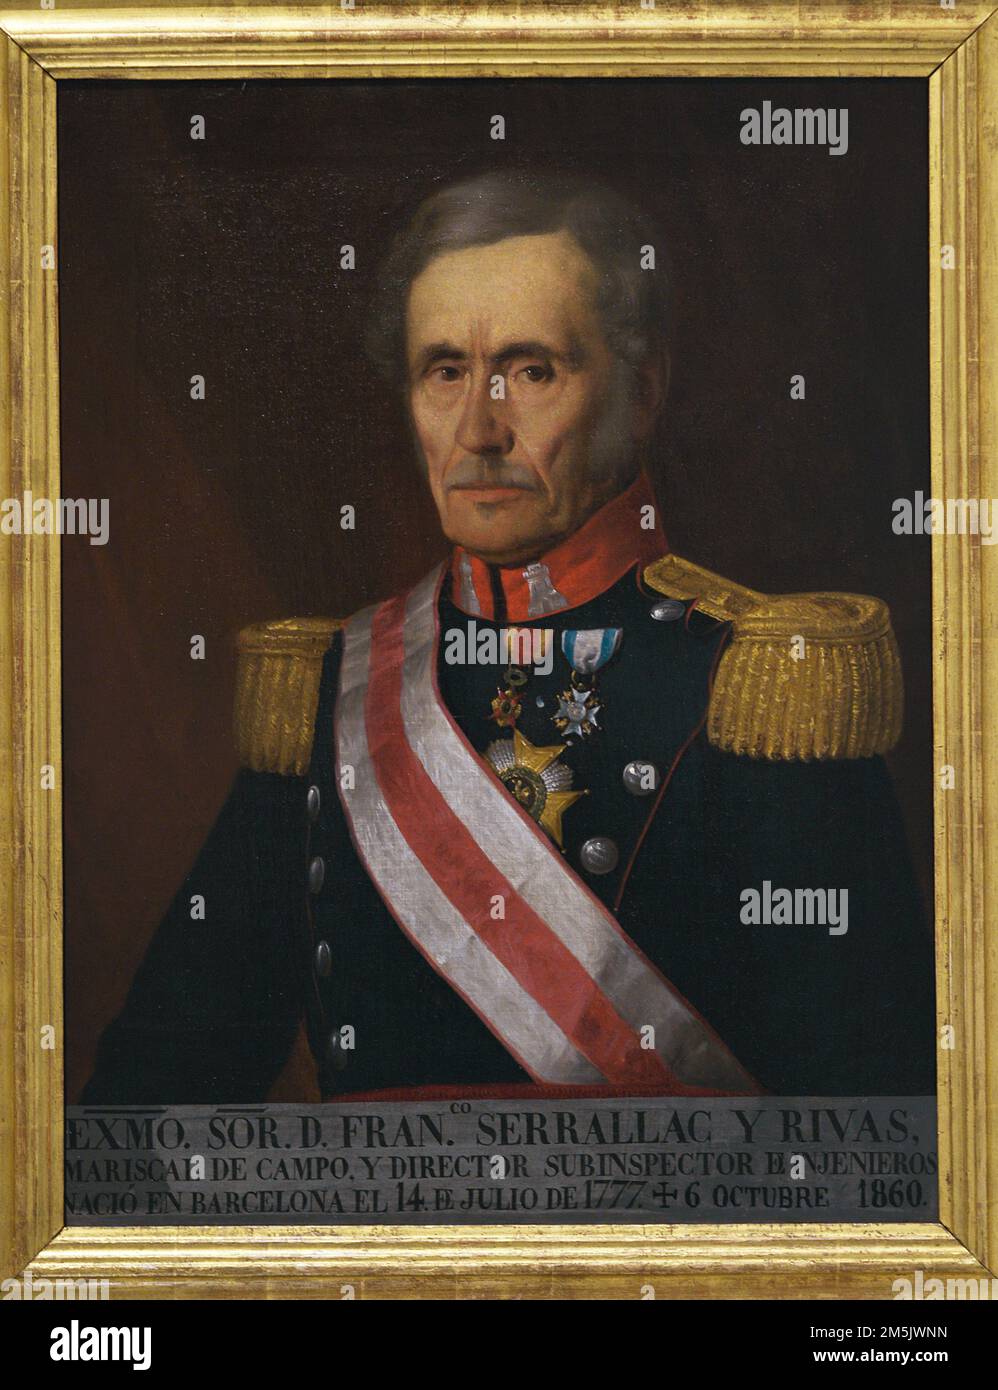 Francisco Serrallac y Rivas (1777-1860). Spanish military. Field Marshal of Engineers. Portrait. Anonymous, c. 1900. Oil on canvas. Army Museum. Toledo. Spain. Stock Photo